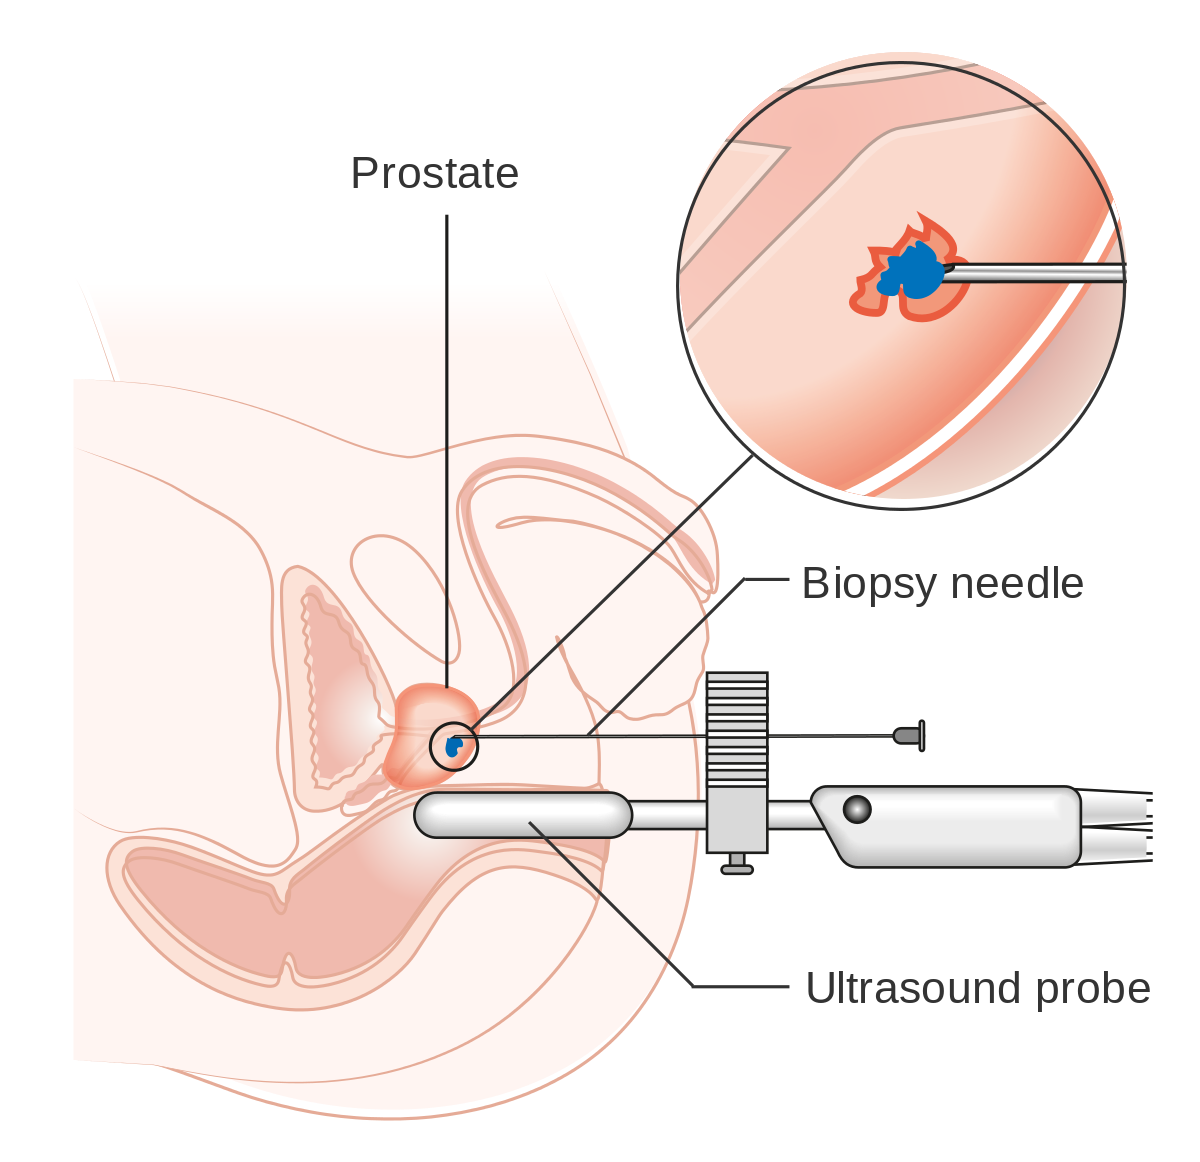 Needle clipart biopsy, Needle biopsy Transparent FREE for